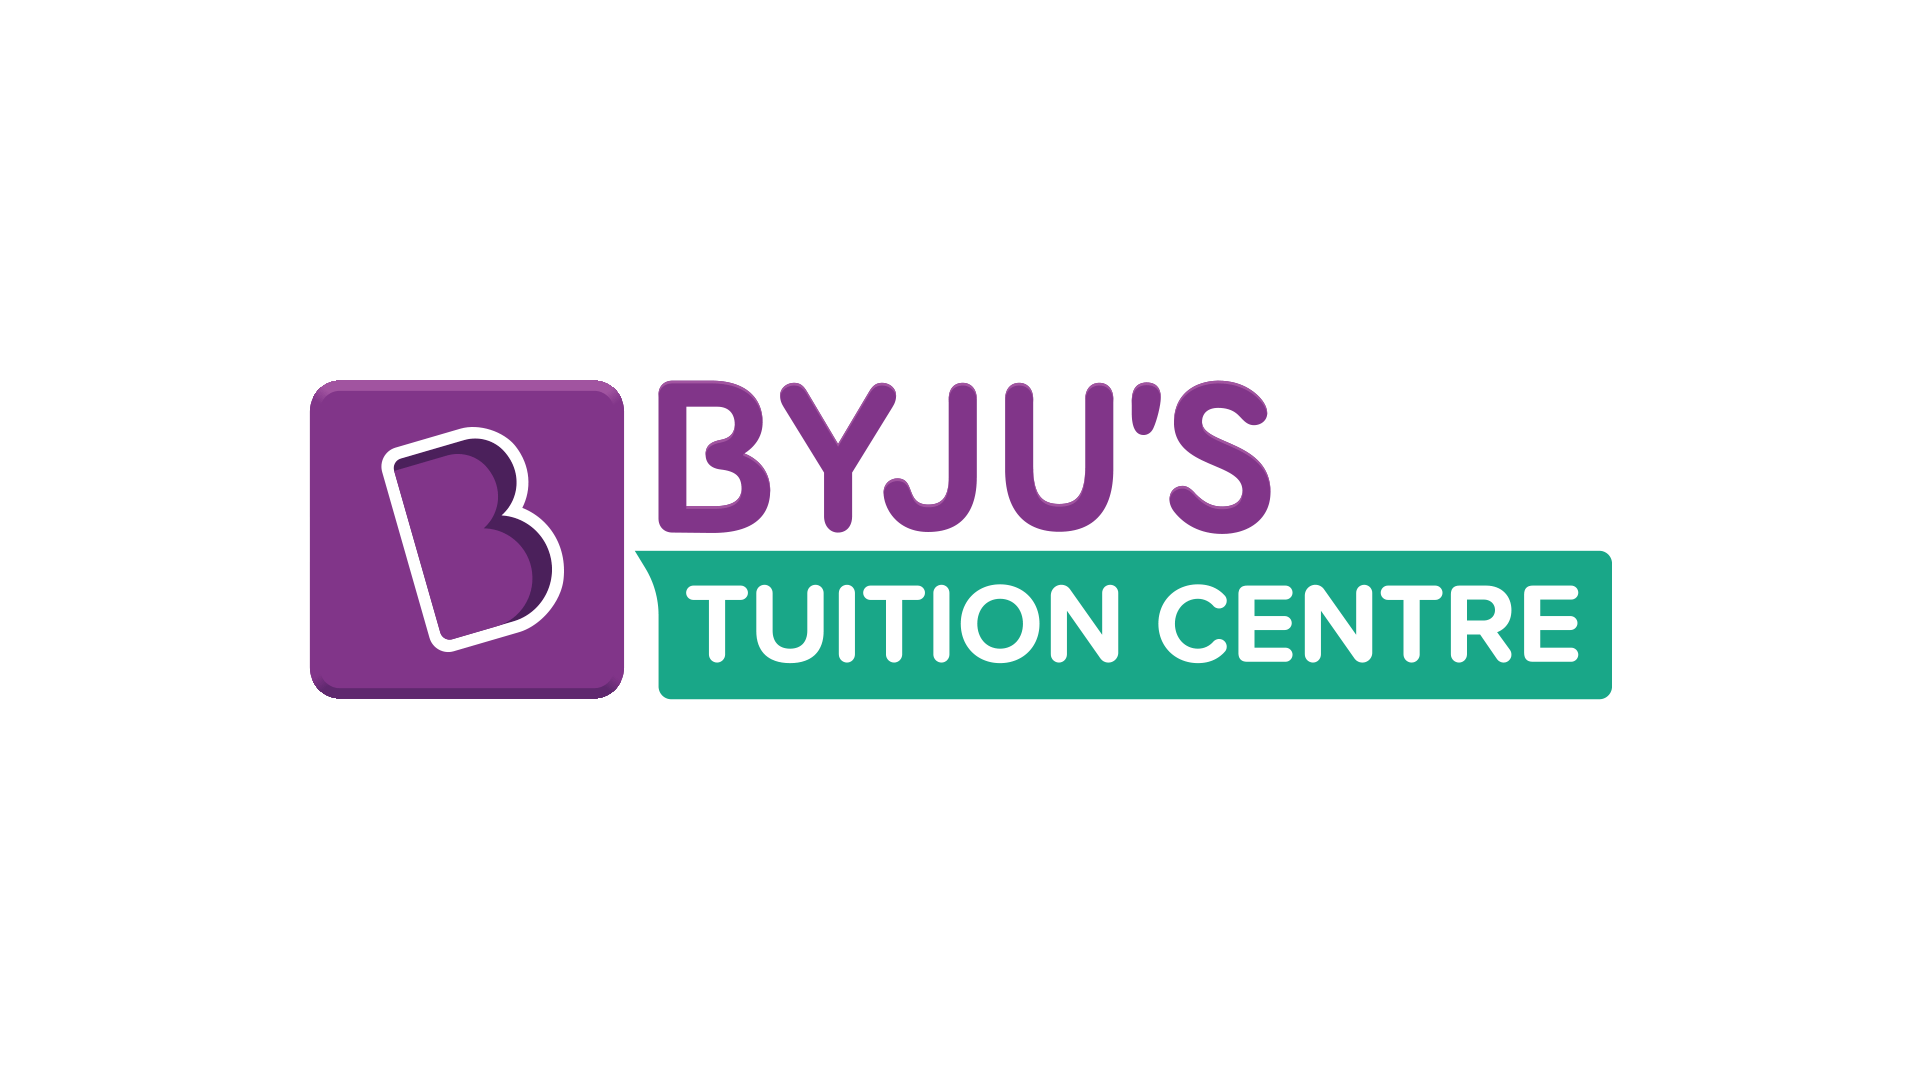 BYJU’S Launches ‘BYJU’S Tuition Centre’ across Kerala